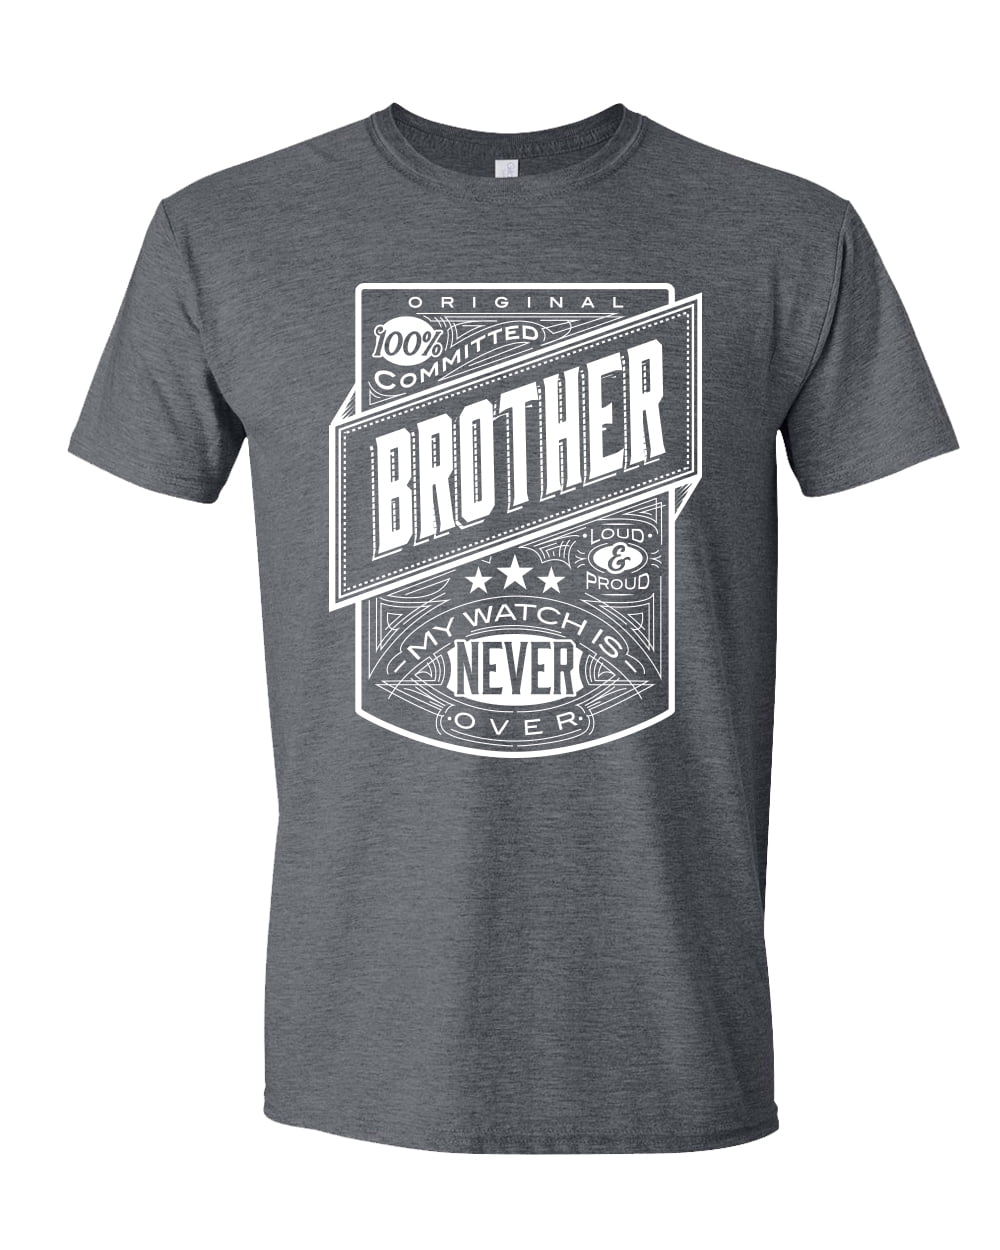 Gifts for Brother | Best Gift Ideas for Brother Online | Free Shipping